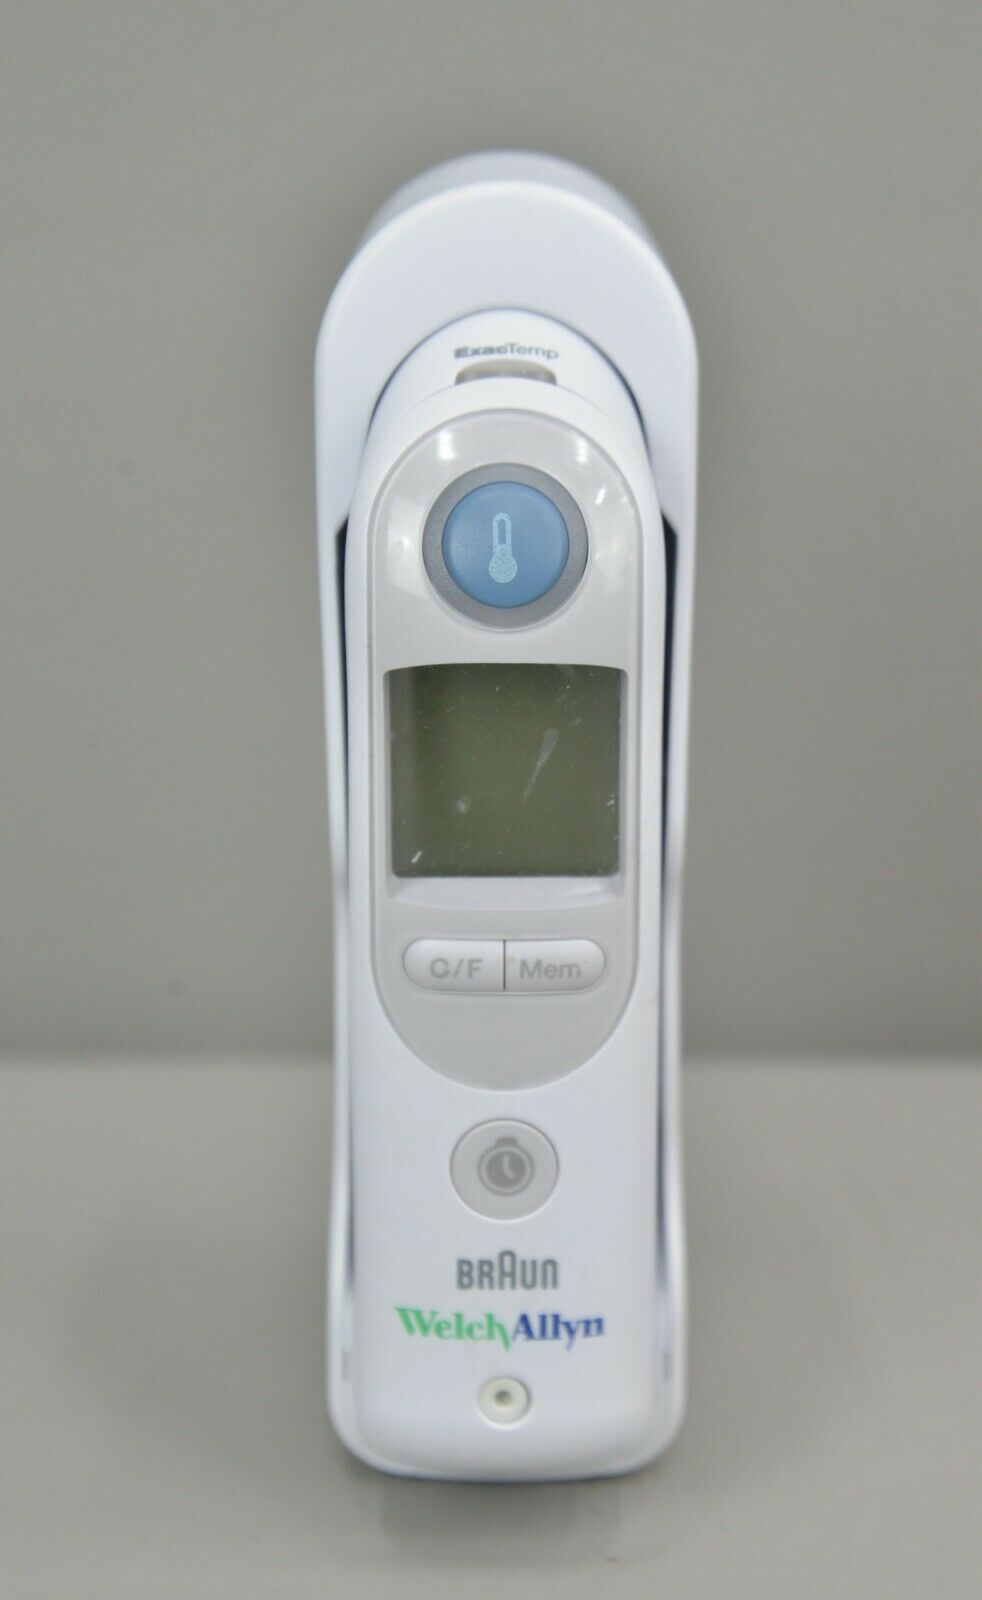 Welch Allyn Braun ThermoScan Pro 6000 Ohrthermometer